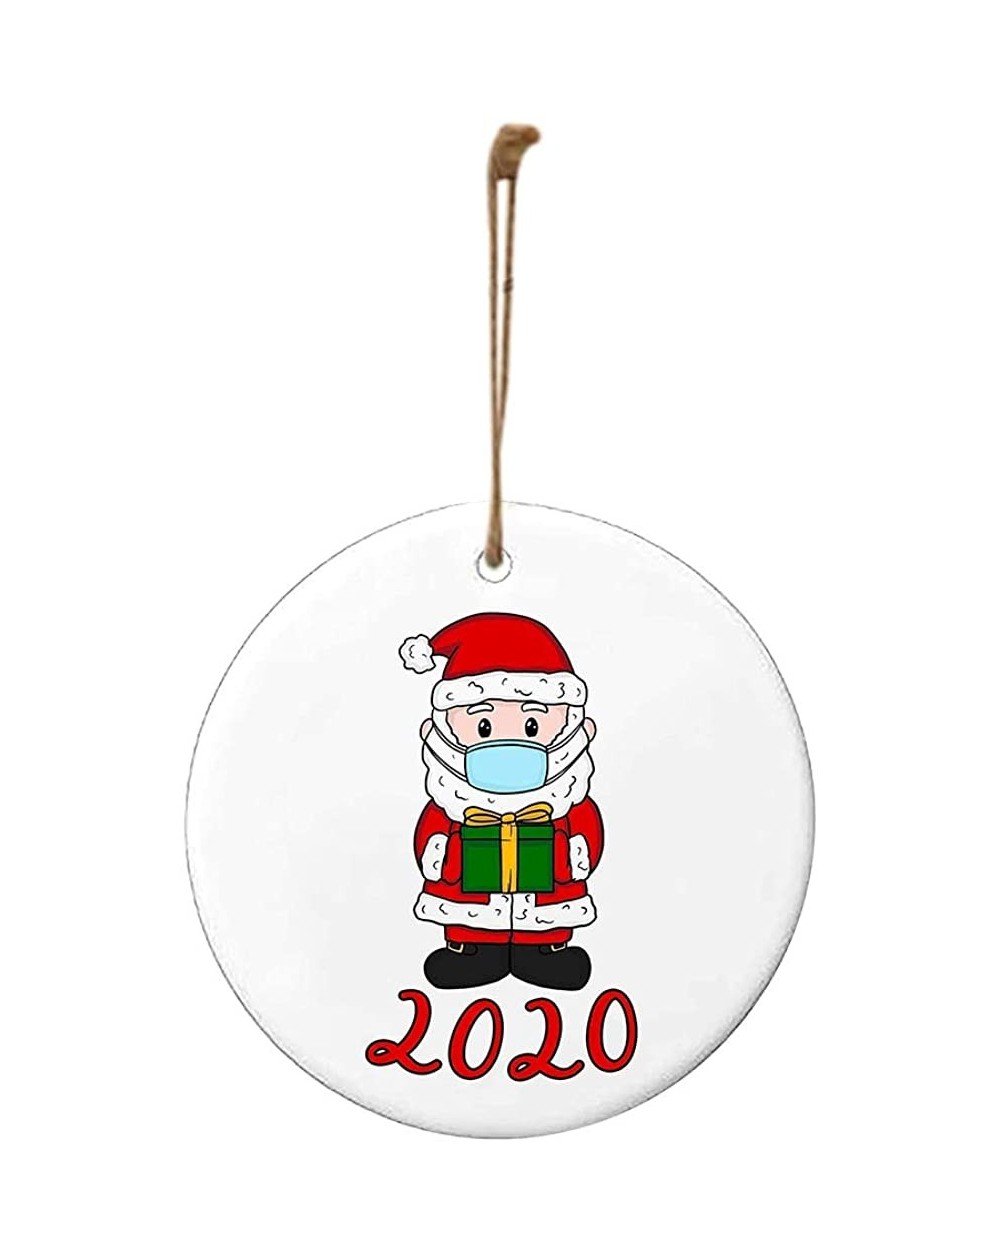 Ornaments 2020 Christmas Decoration Ornament-Wooden Santa Claus Pendant Decorates the Christmas Tree Personalized Family Orna...